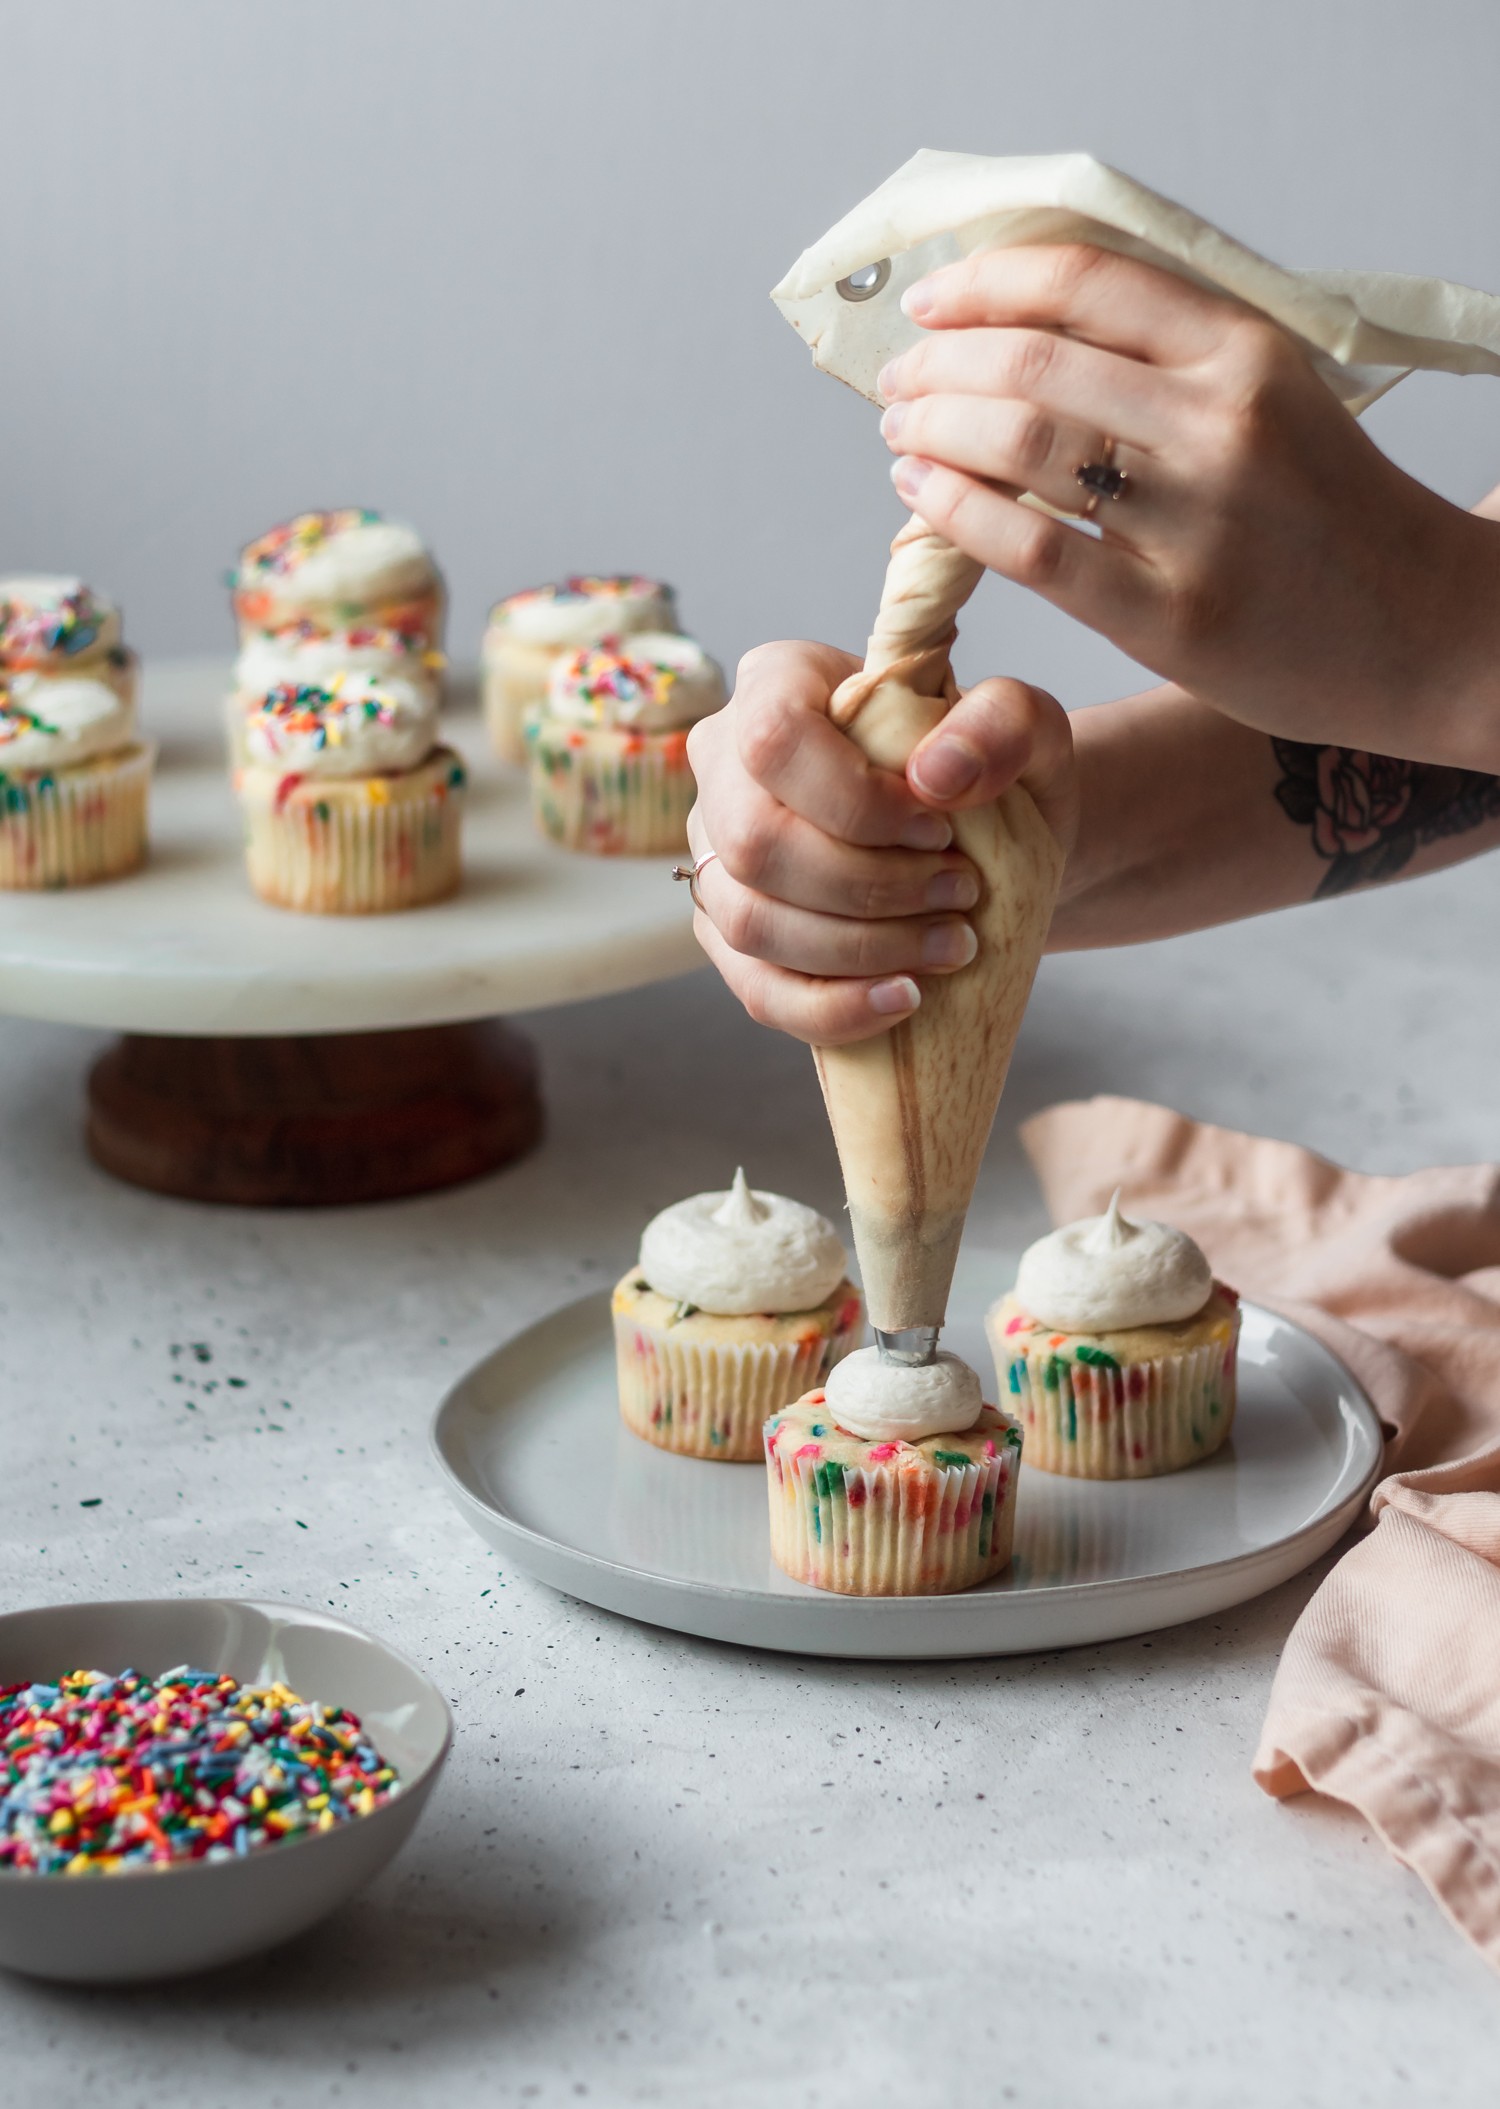 A woman's hands piping frosting onto cupcakes, with a cake stand of cupcakes in the background, and a bowl of sprinkles in the lower left corner with a white and grey background.